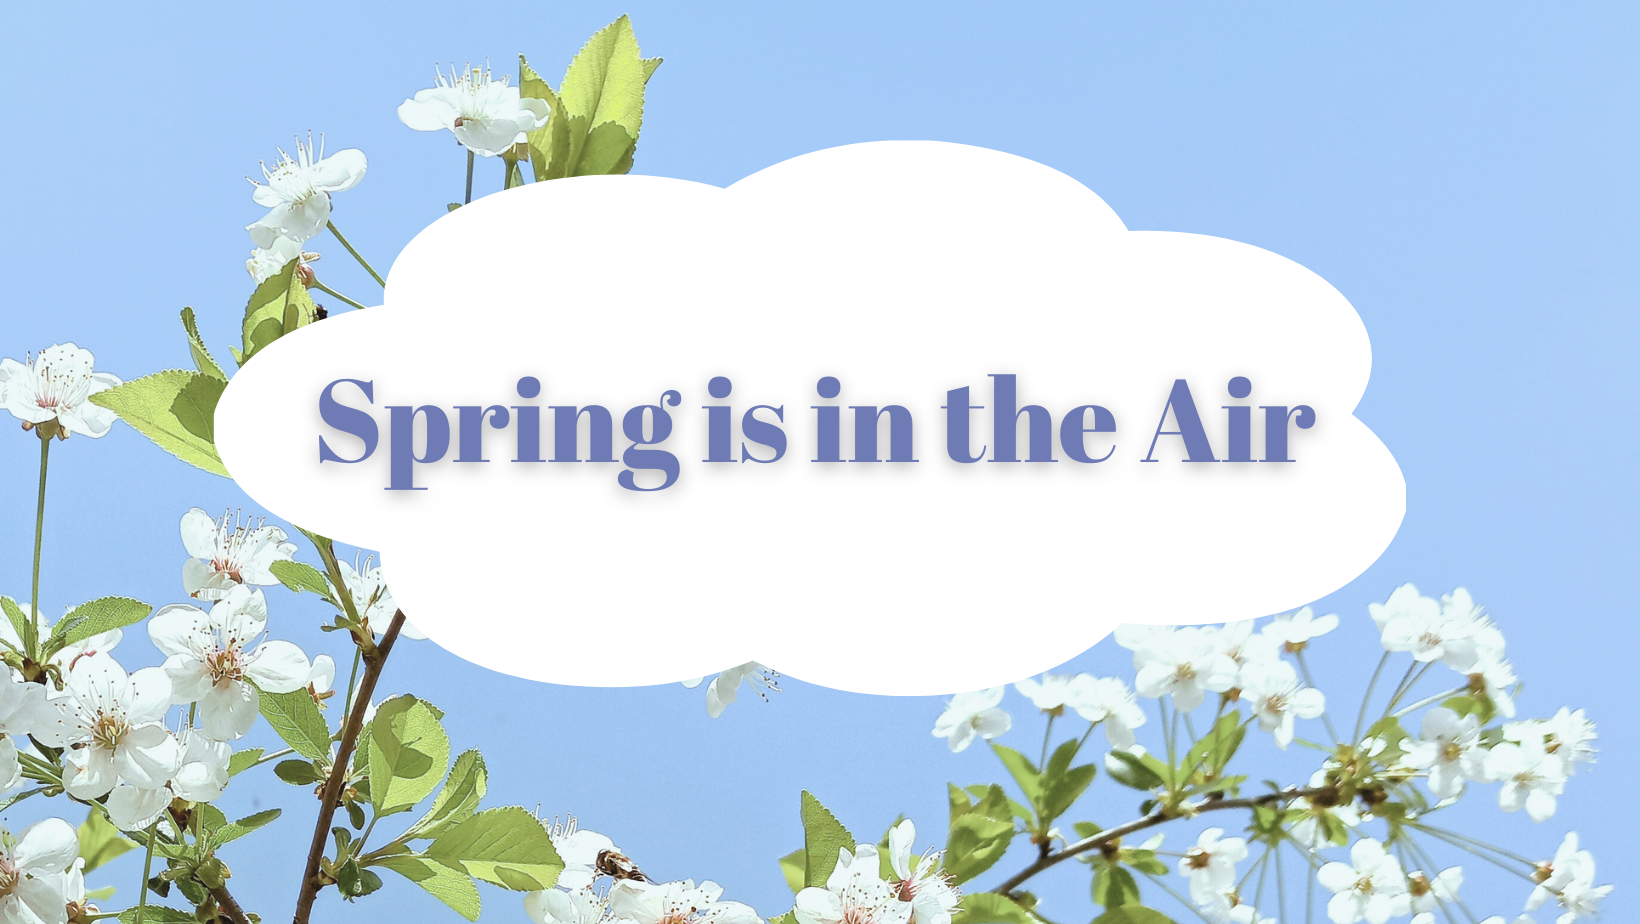 Image shows some budding flowers against a blue sky. In the foreground there is a cartoon cloud with text that reads, "Spring is in the Air."